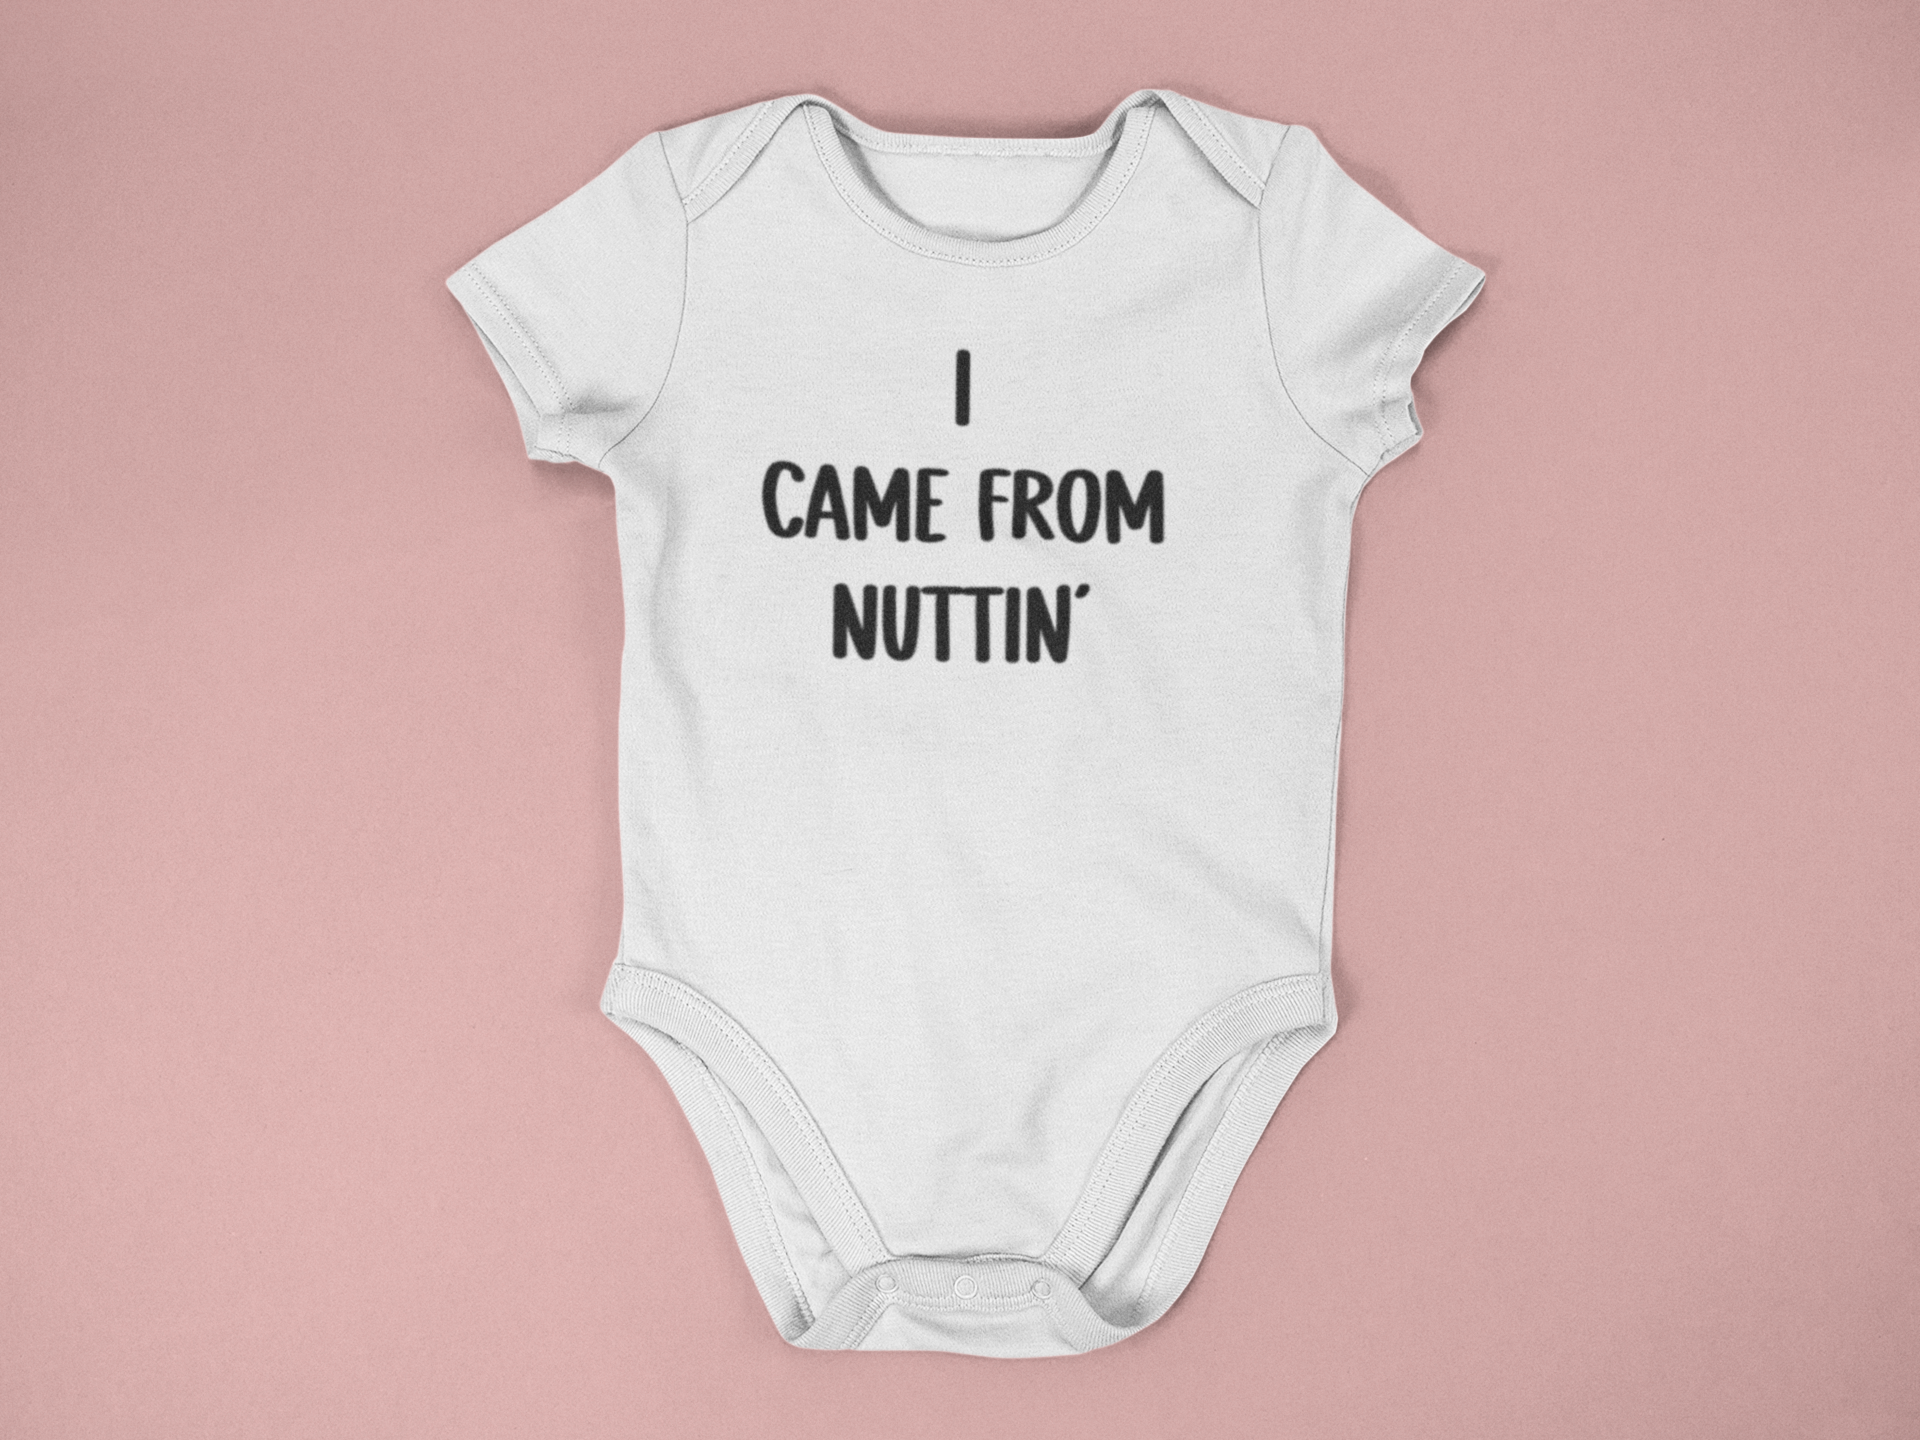 I came from nuttin' | Baby Onesie